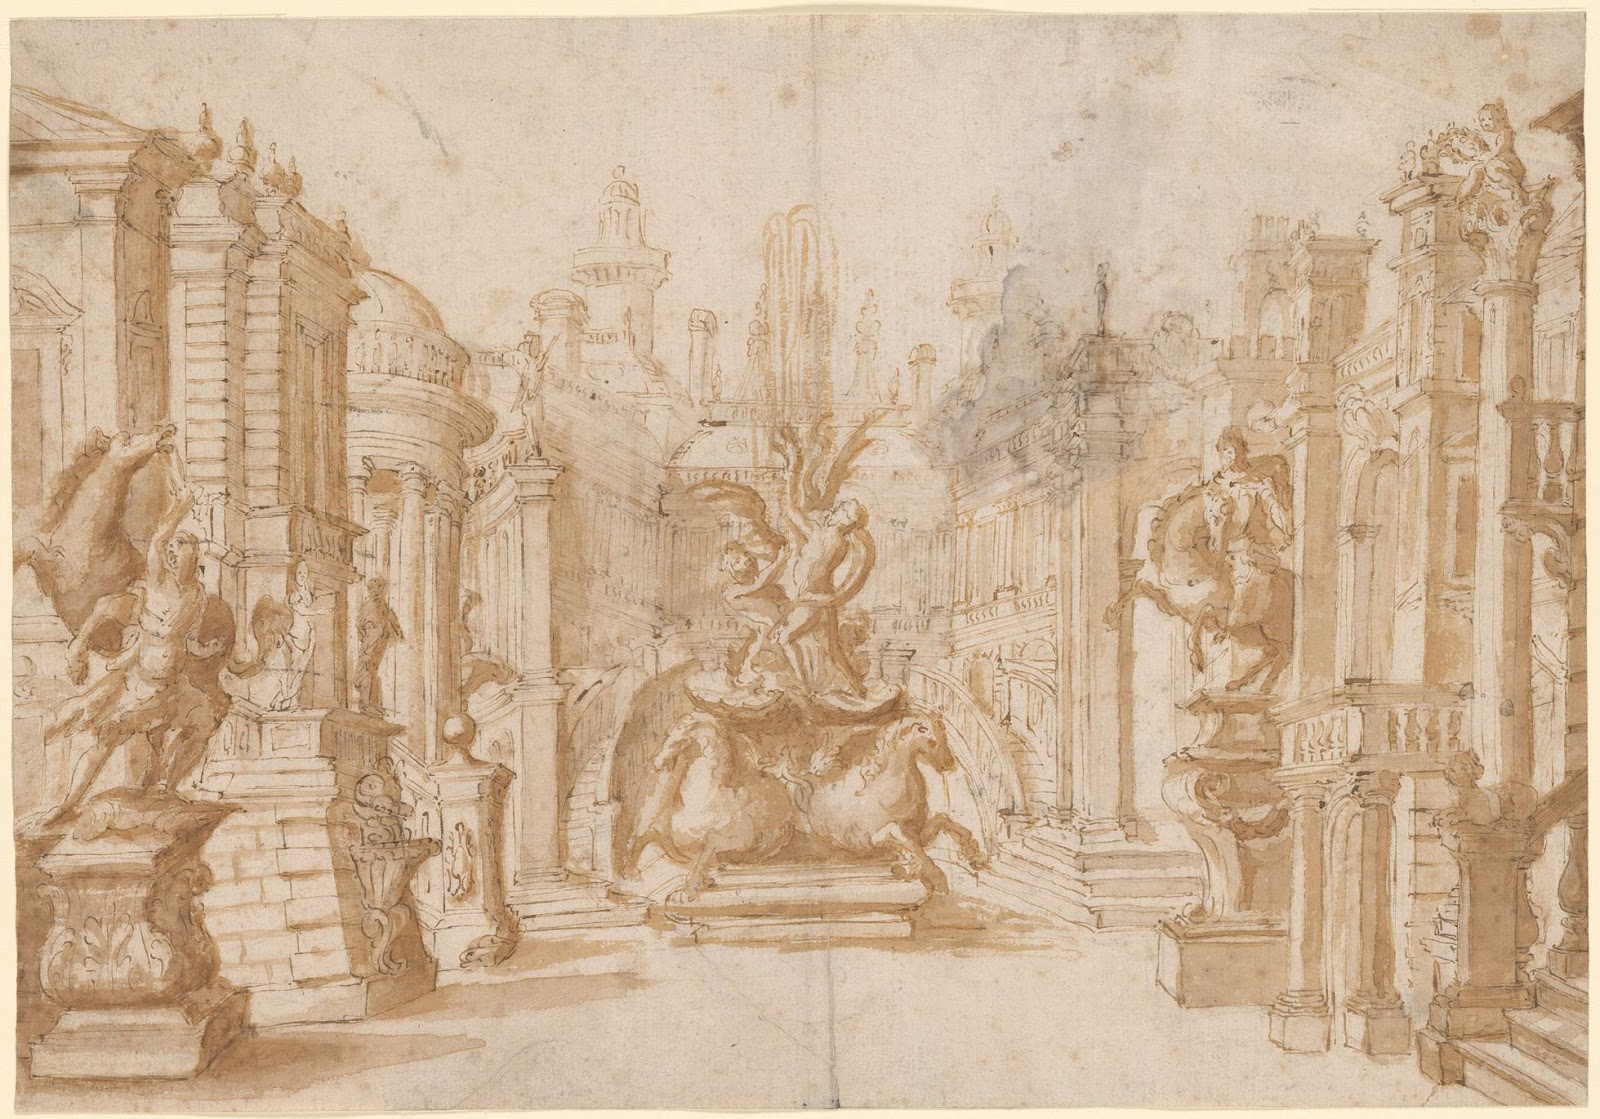 Spencer Alley: Life-Drawing from 17th-century Europe